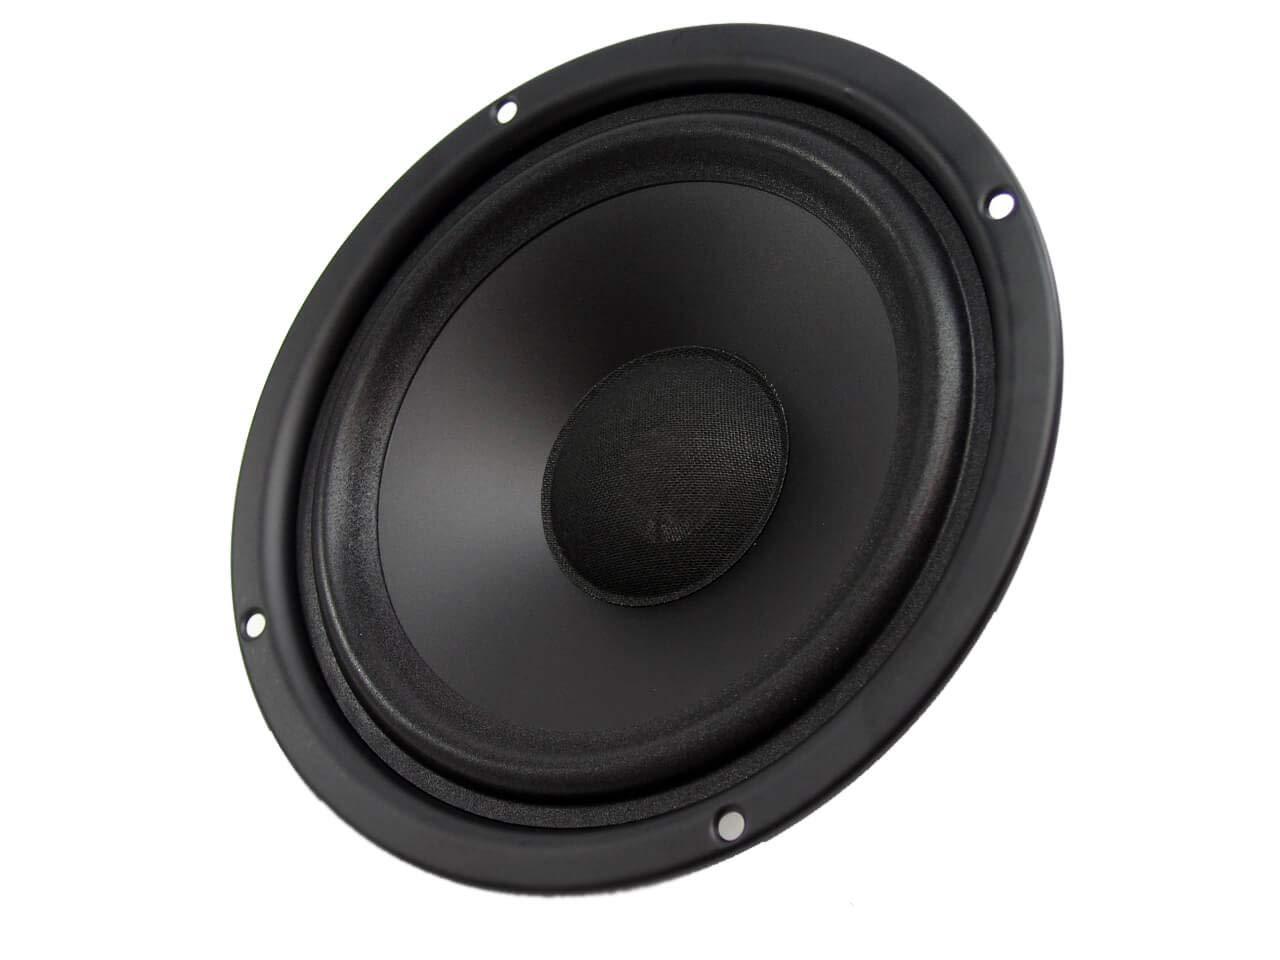 SS Audio boston acoustics style 6.5 inch woofer, a40 series ii and a-40 series 2, w-675